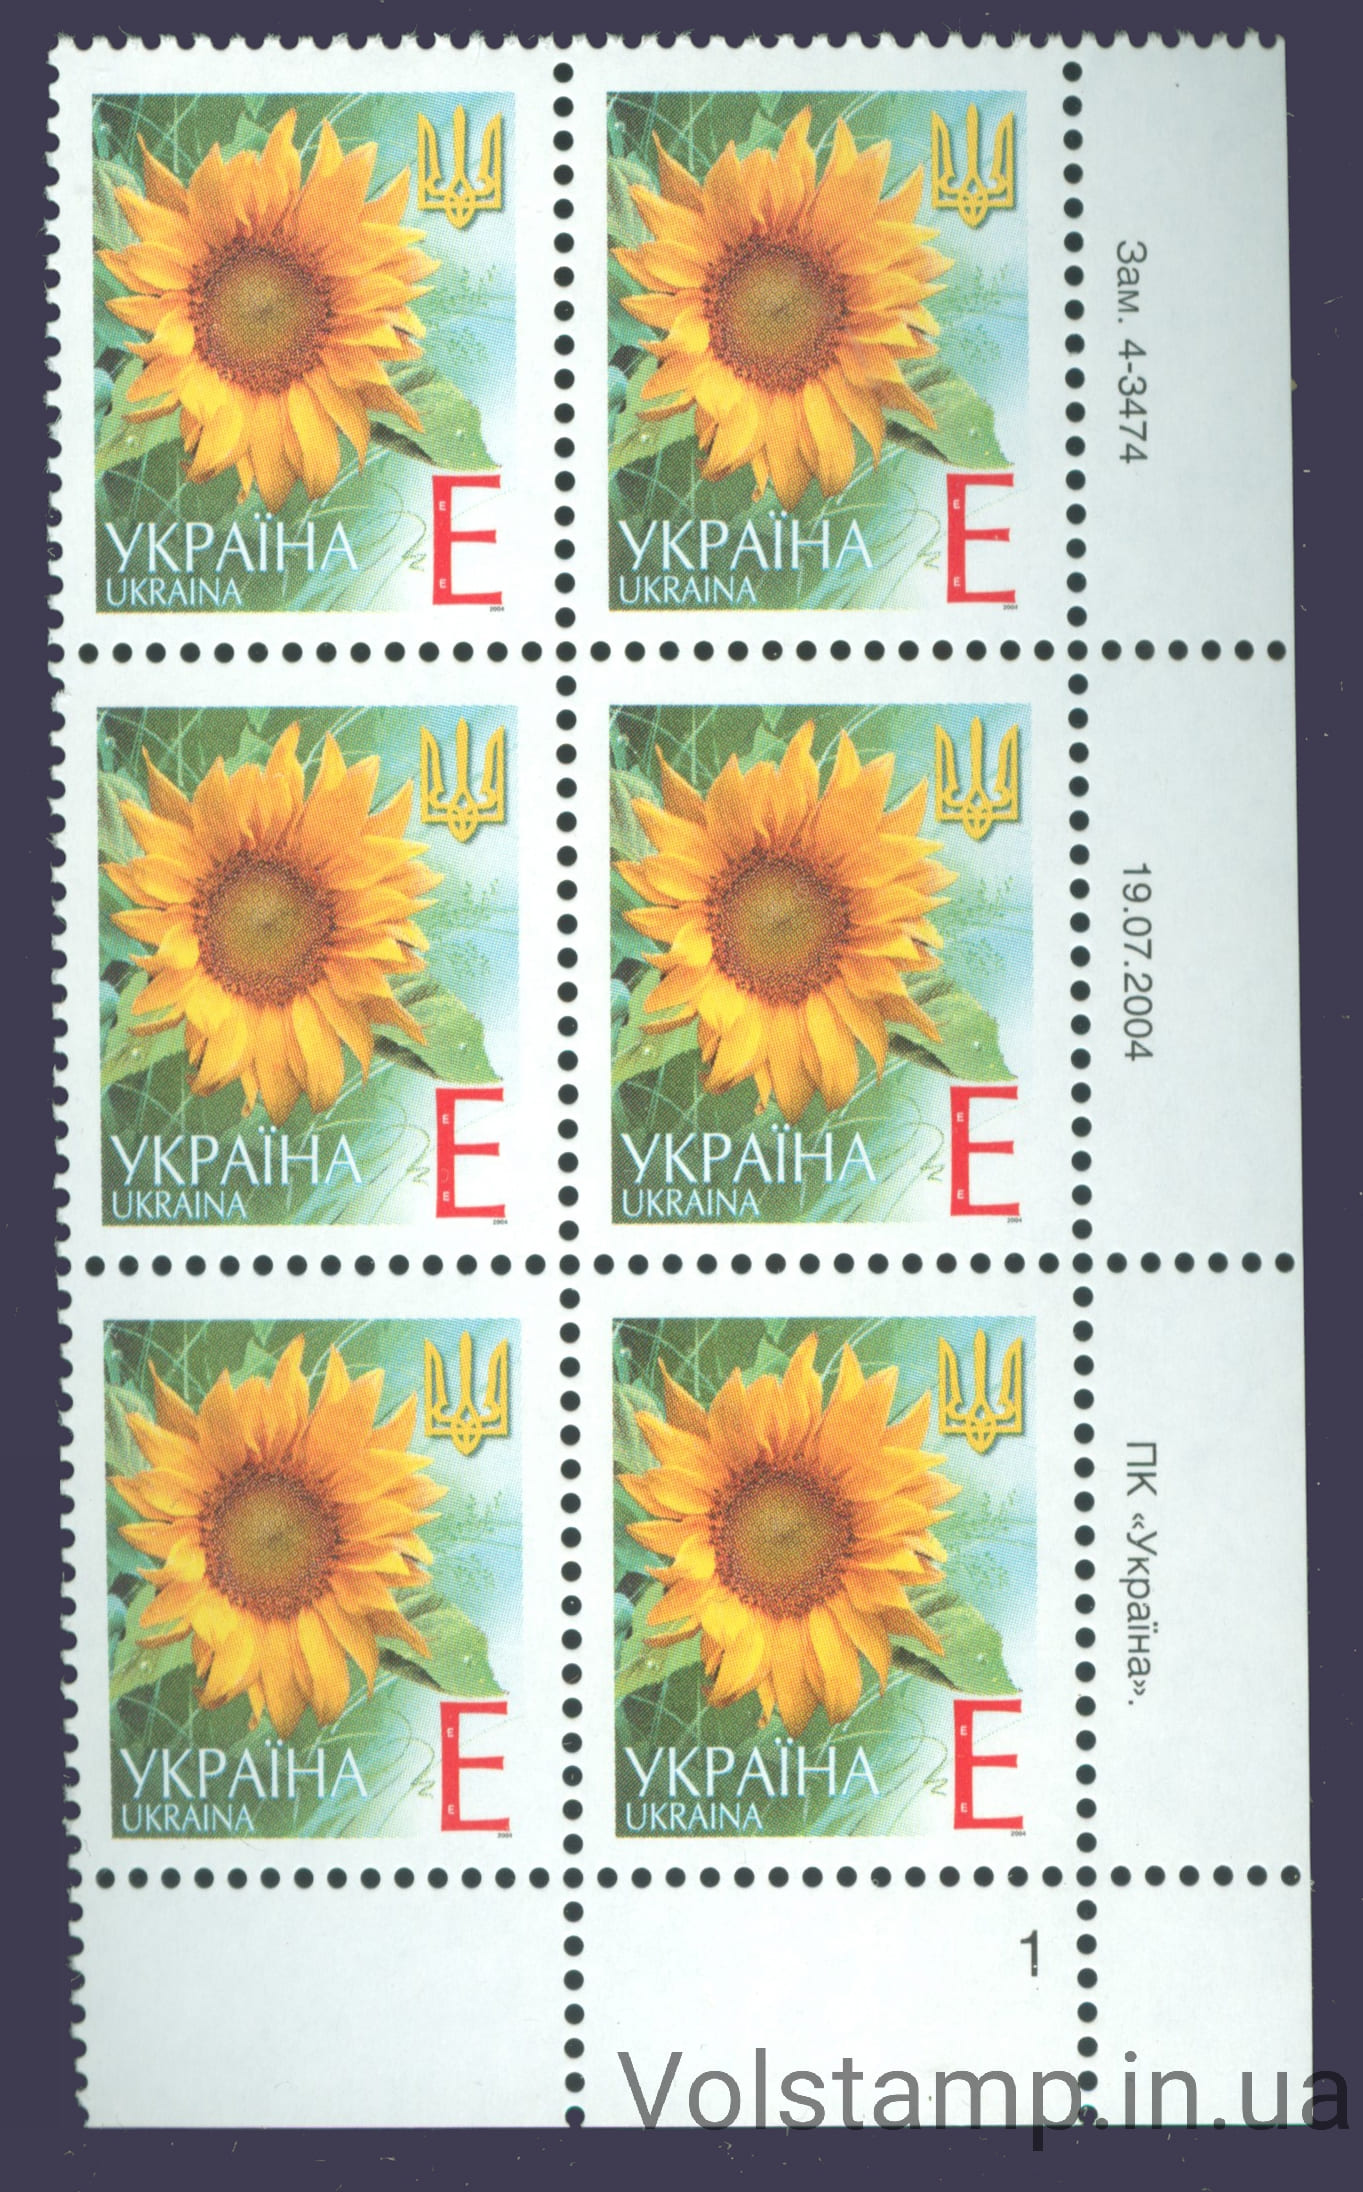 19.07.2004 Standard sixblock E (right bottom by numbers) - to choose from №4-3474